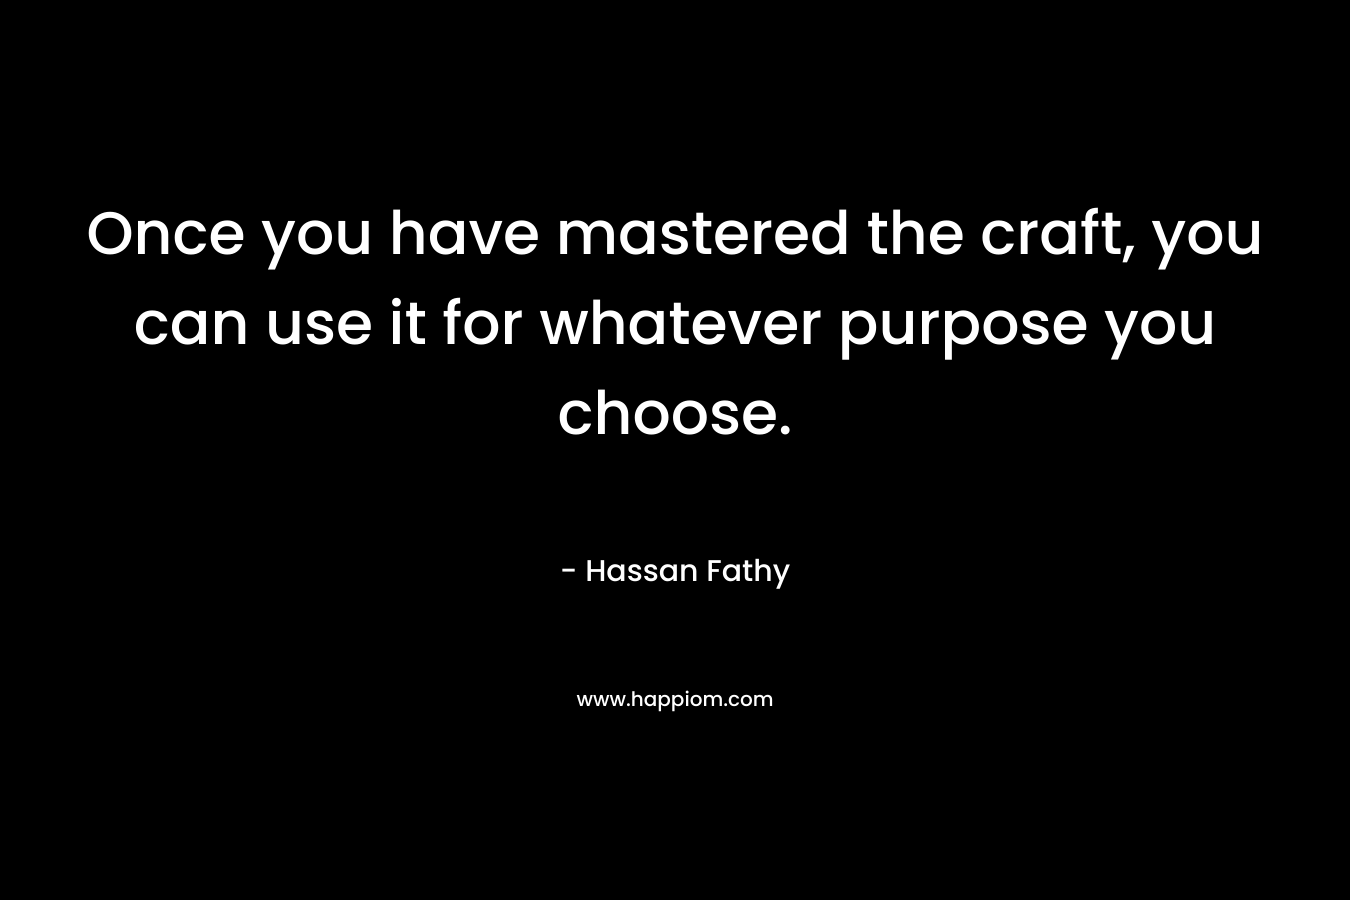 Once you have mastered the craft, you can use it for whatever purpose you choose. – Hassan Fathy